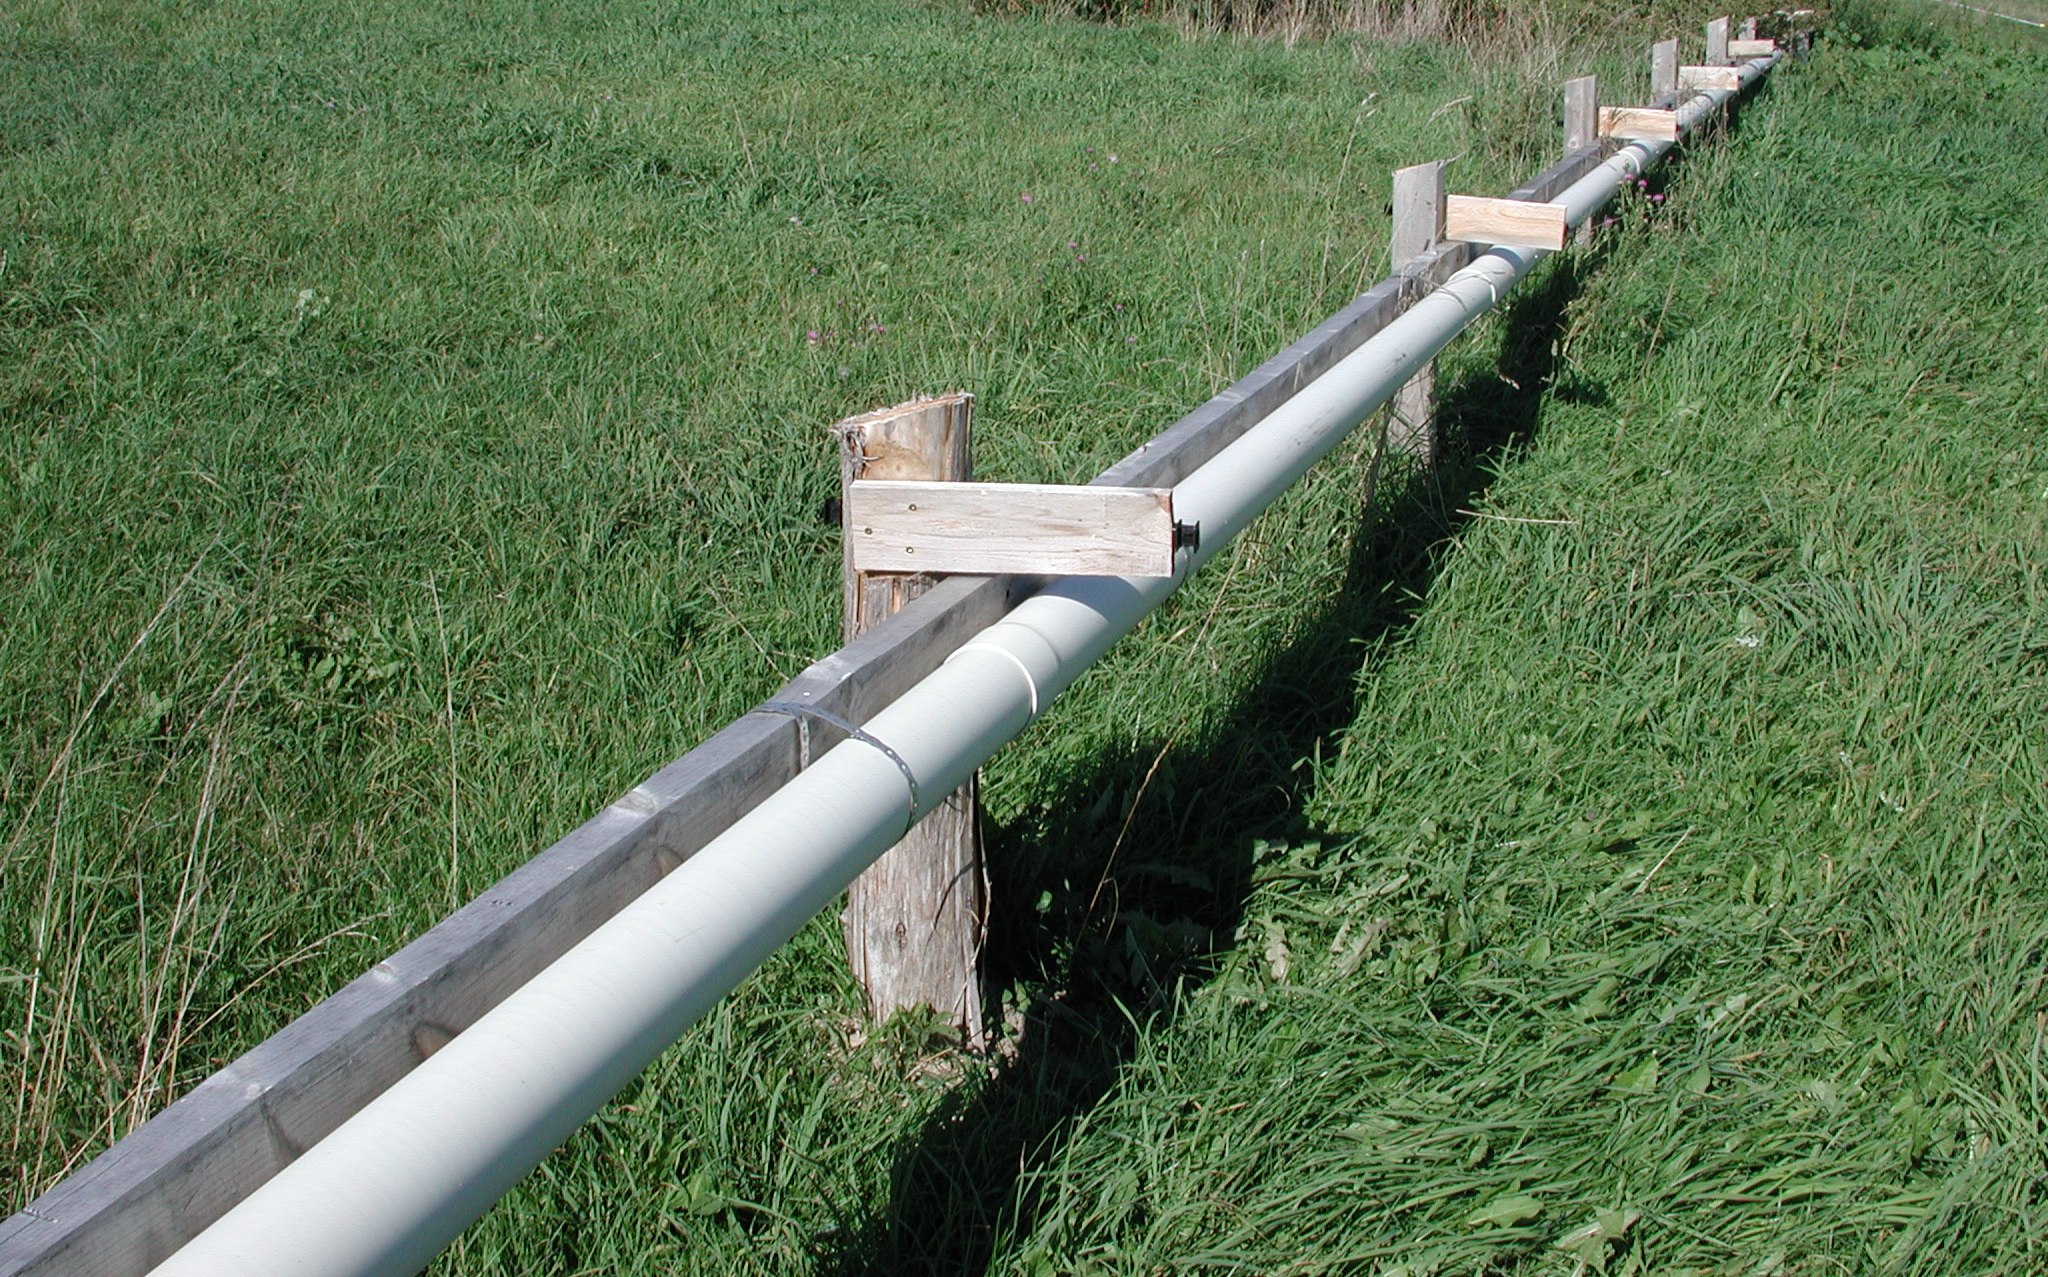 Close up picture of a pipe running out into a field. The pipe contains evenly spaced 1.9 centimetre (3/4 inch) holes which allow for distribution of the runoff in to the field.